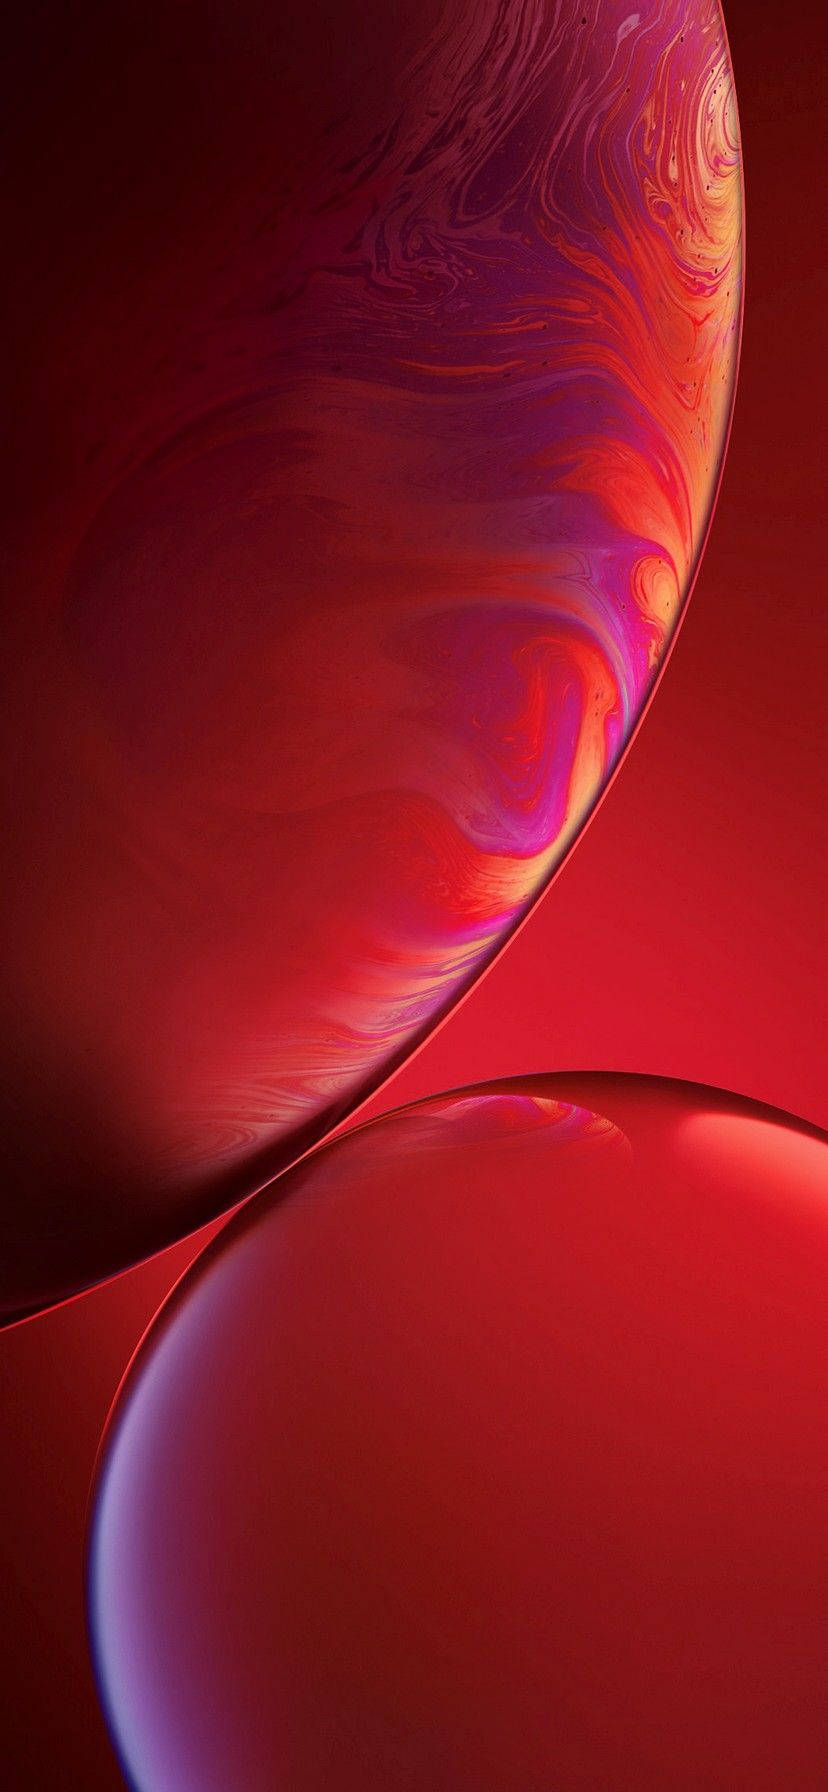 Iphone Xr Red Swirled Bubbles